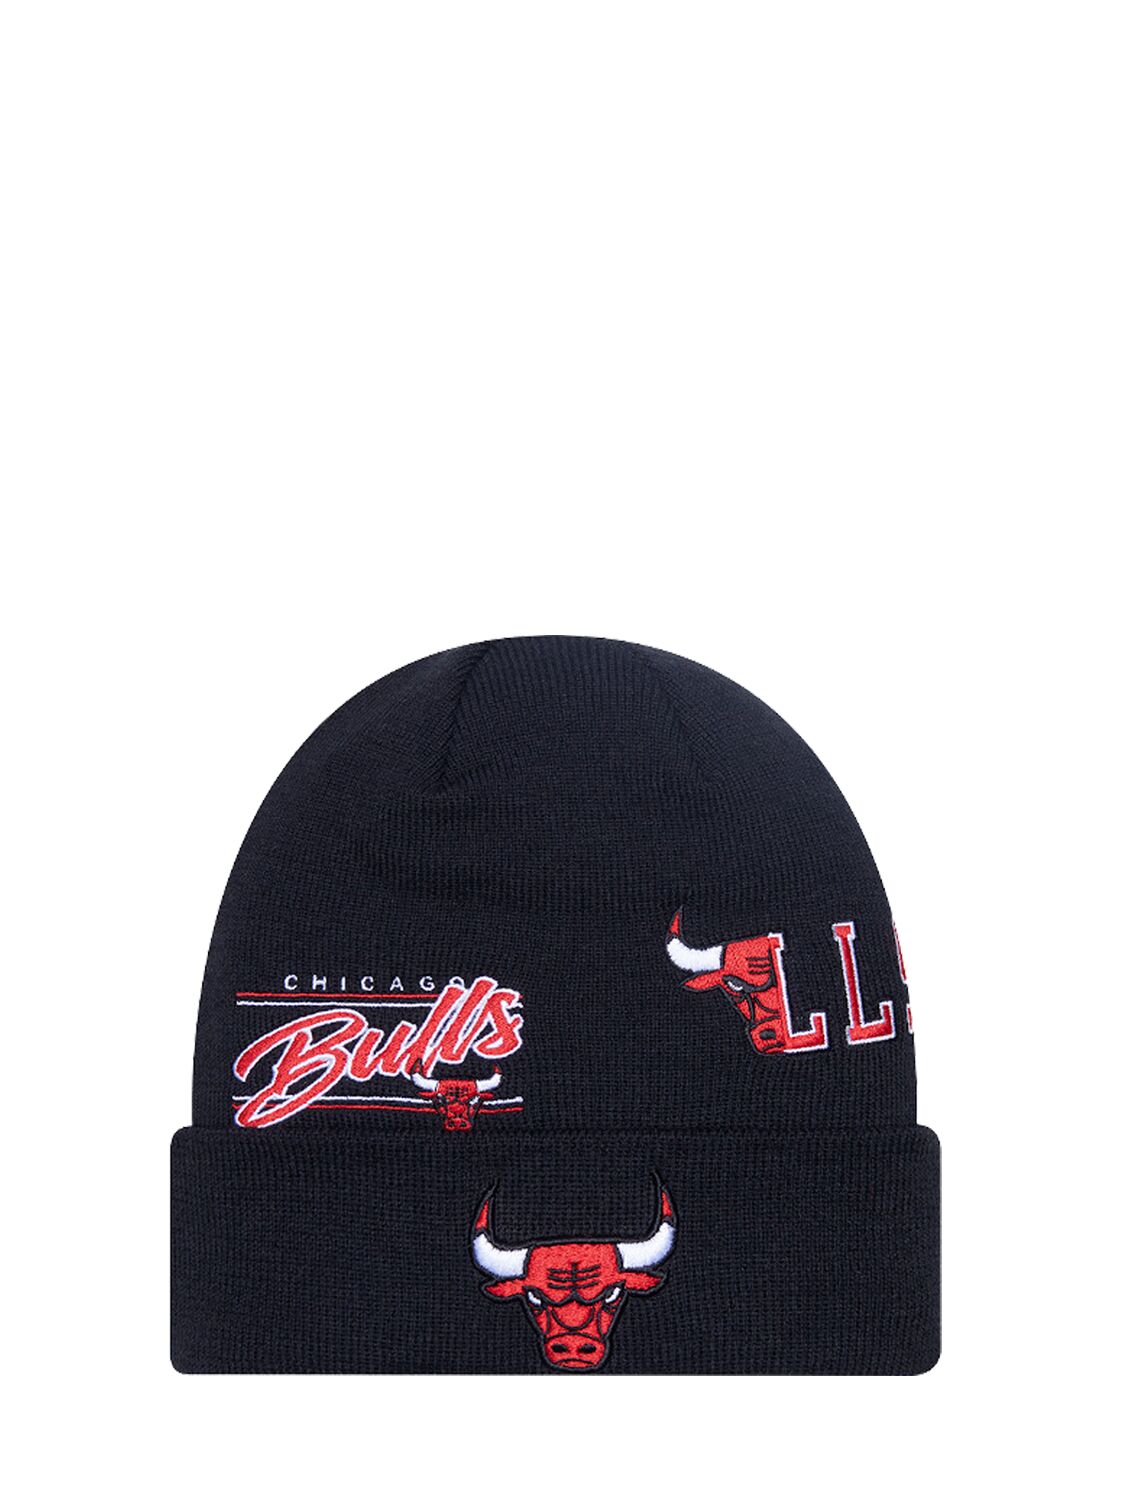 Image of Multi-patch Chicago Bulls Beanie